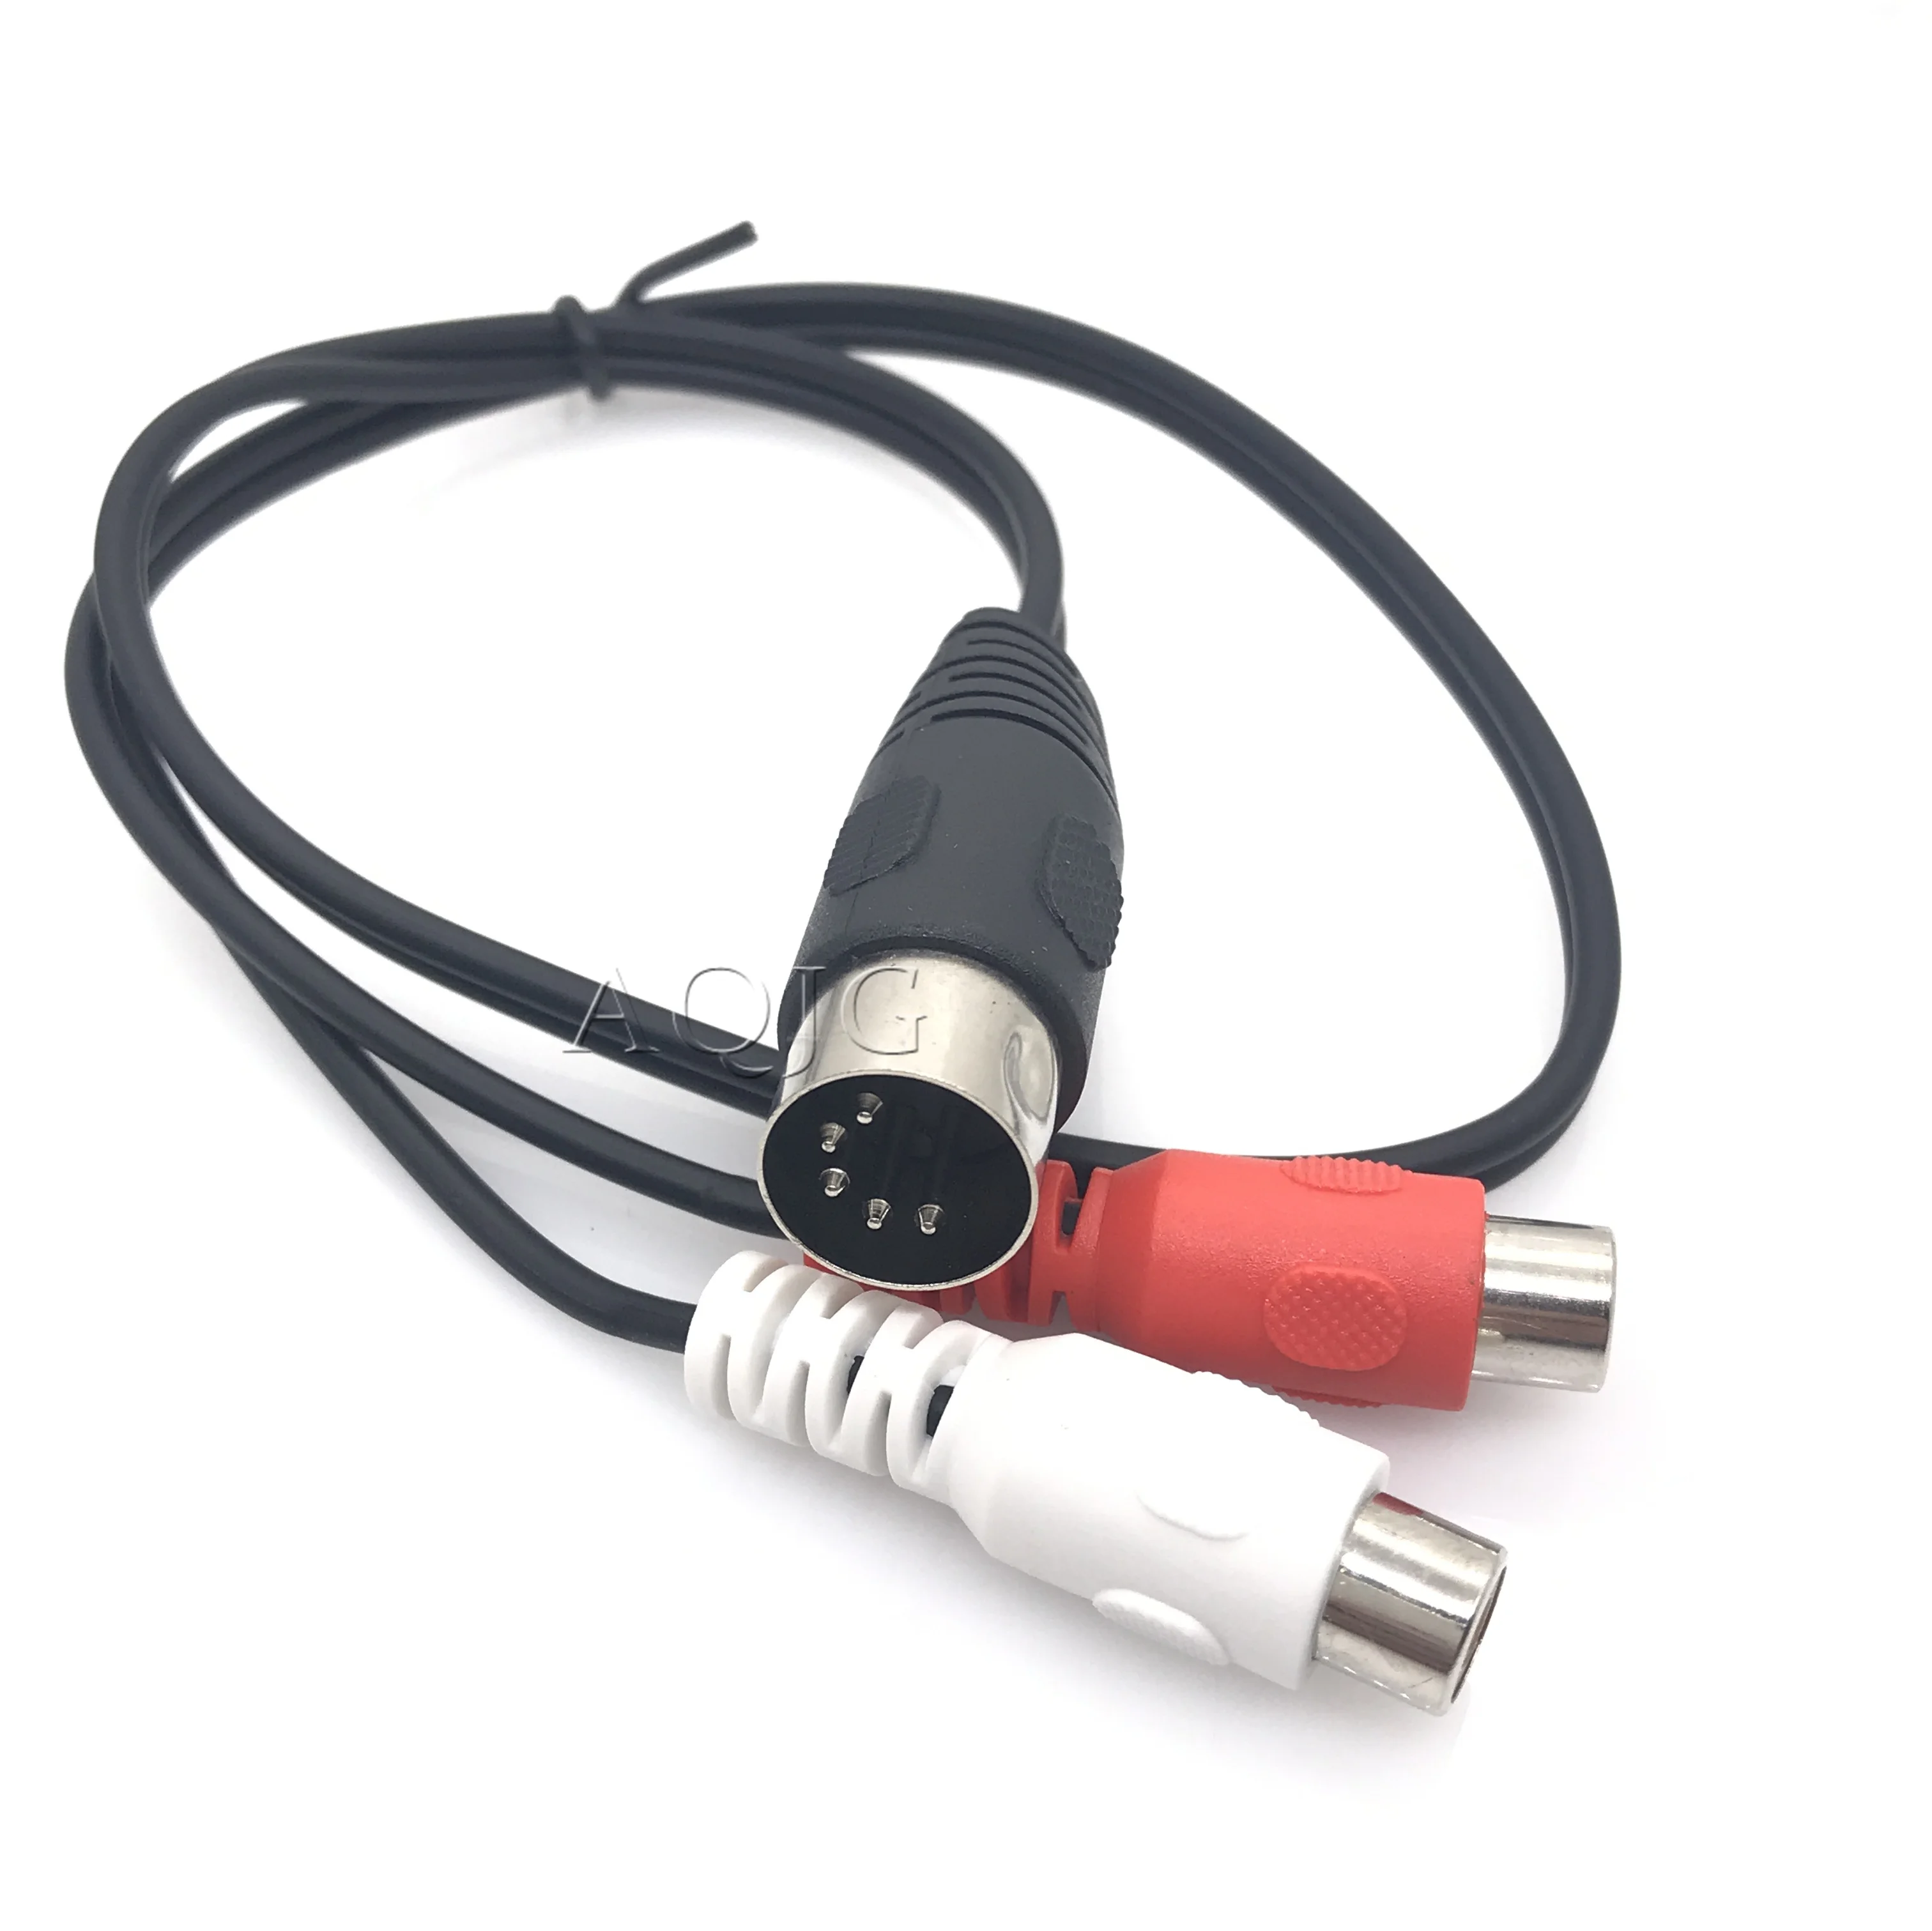 

MIDI DIN 5Pins Male to 2 RCA Phono Female Socket Jack MF Audio Cable 0.5M 1.5M Car Accessories